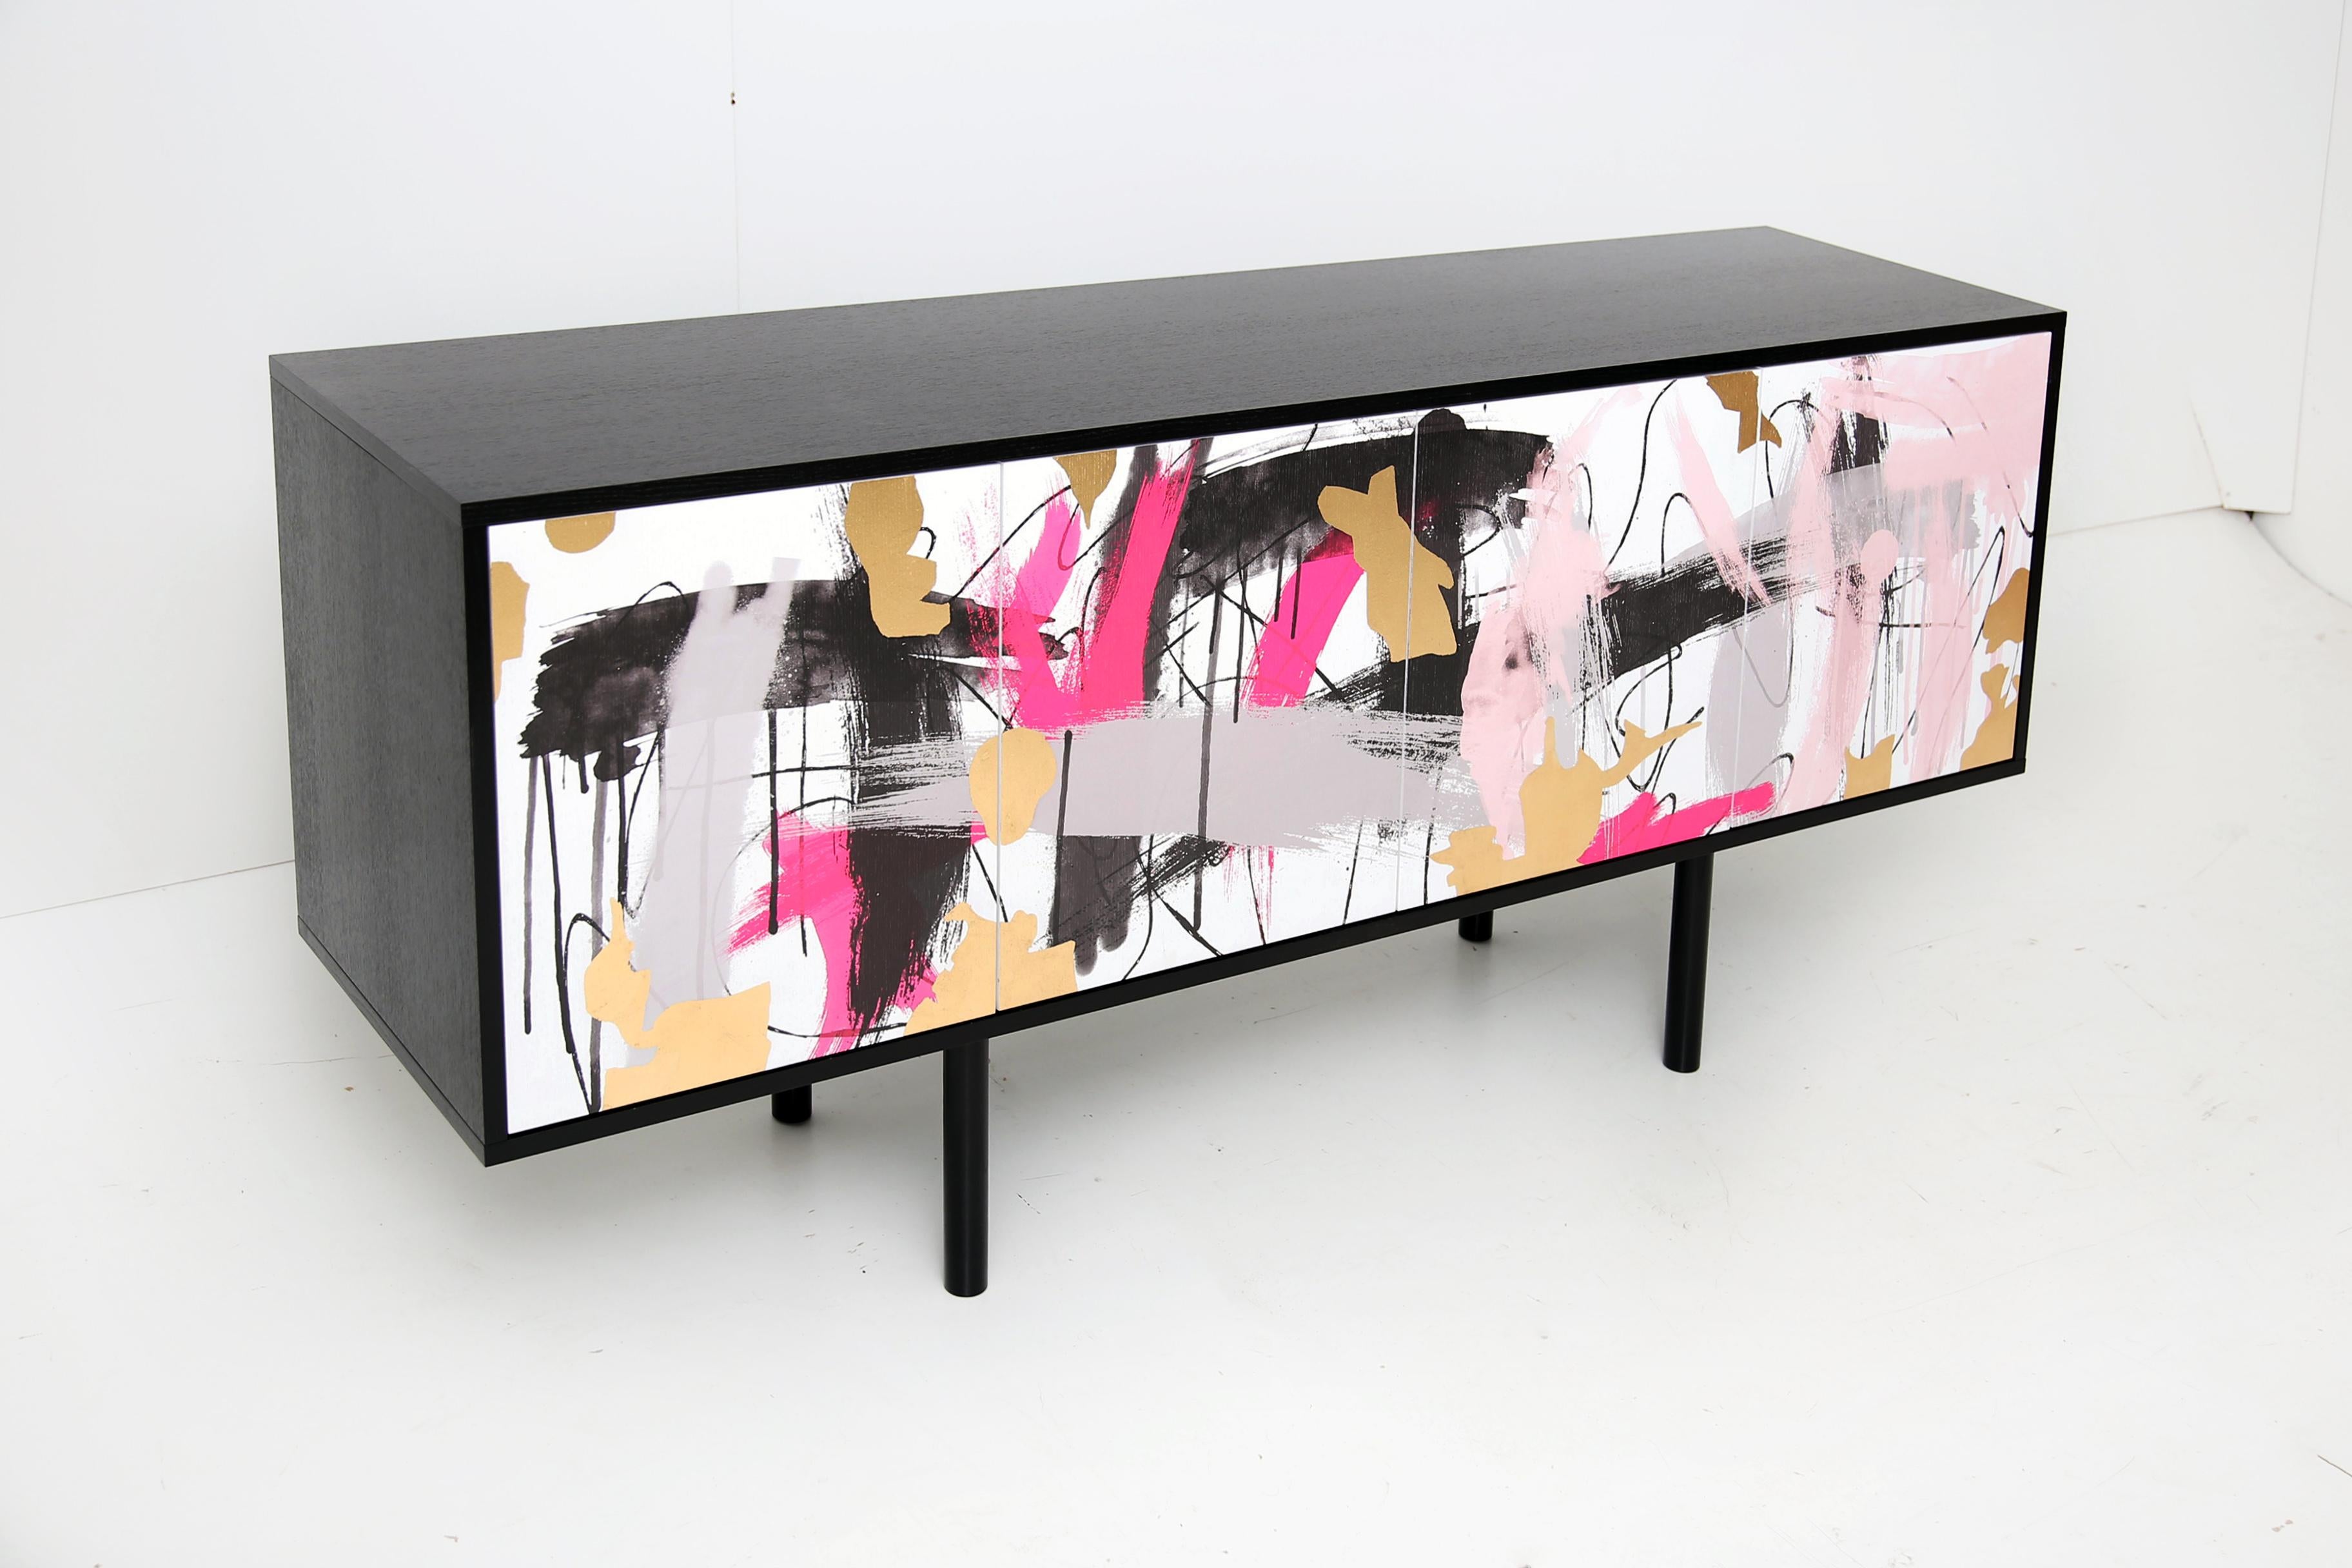 Worthy of its own award show! A modern mixture of function and style, the Splatter media console features clean lines, a uniquely mixed media finish, and plenty of media space. The Splatter Sideboard will fit in and stand out perfectly within your